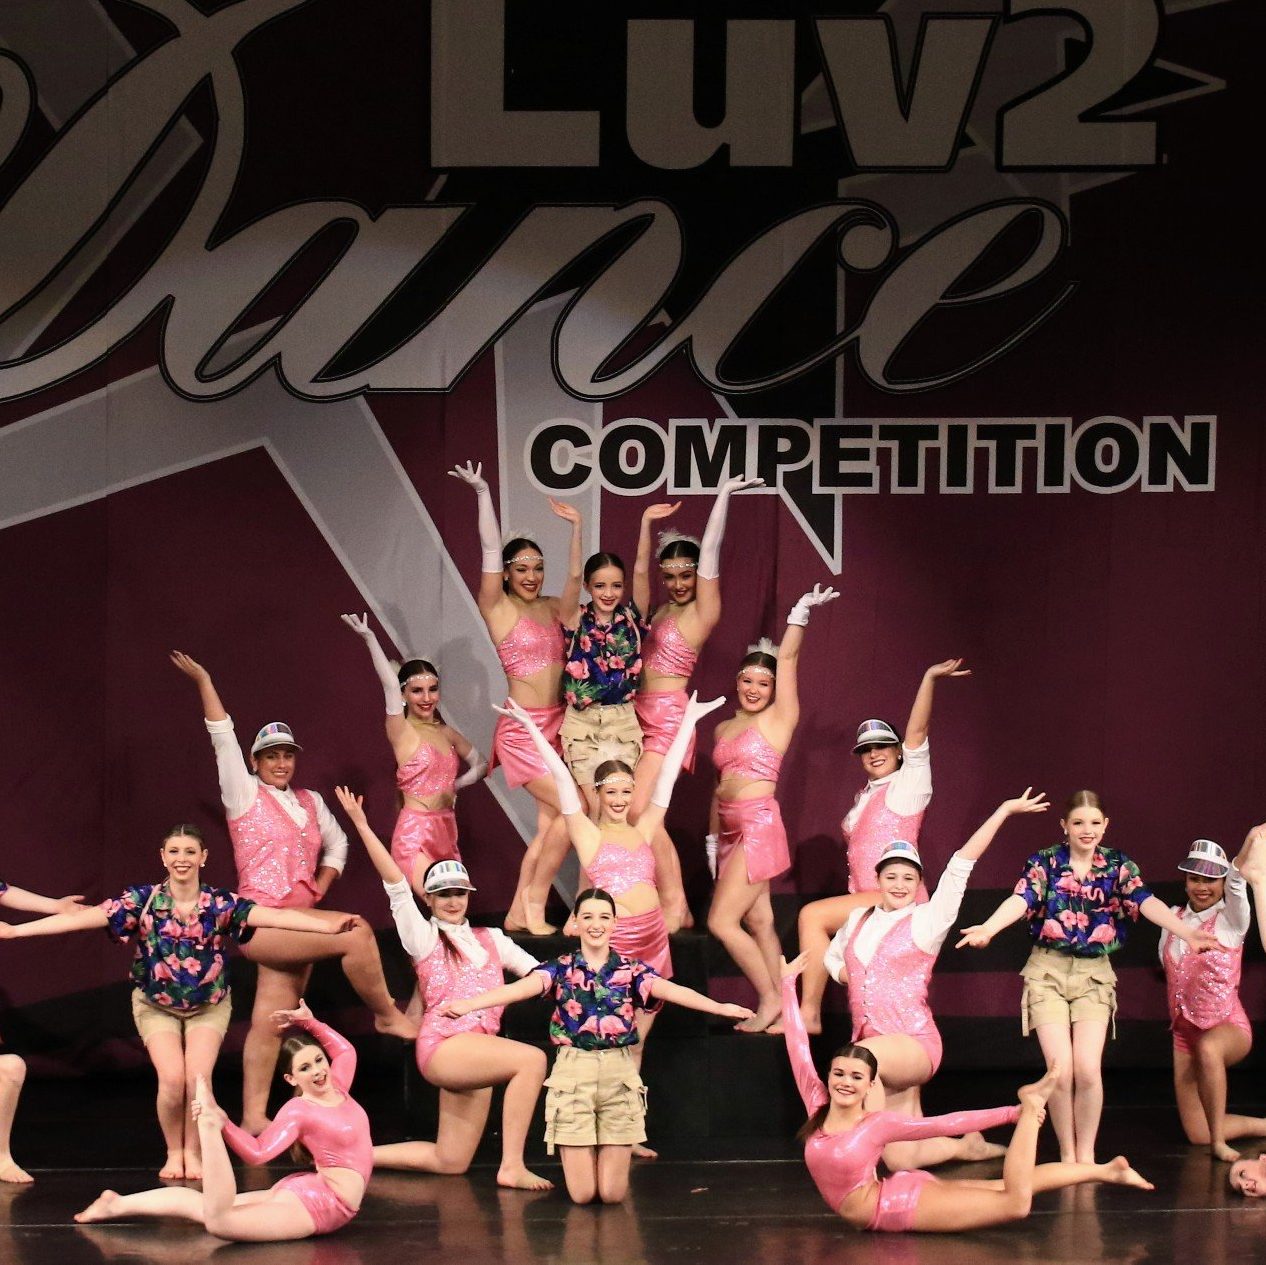 ATJ competitive team 2022 in the ending pose for the production dance number.